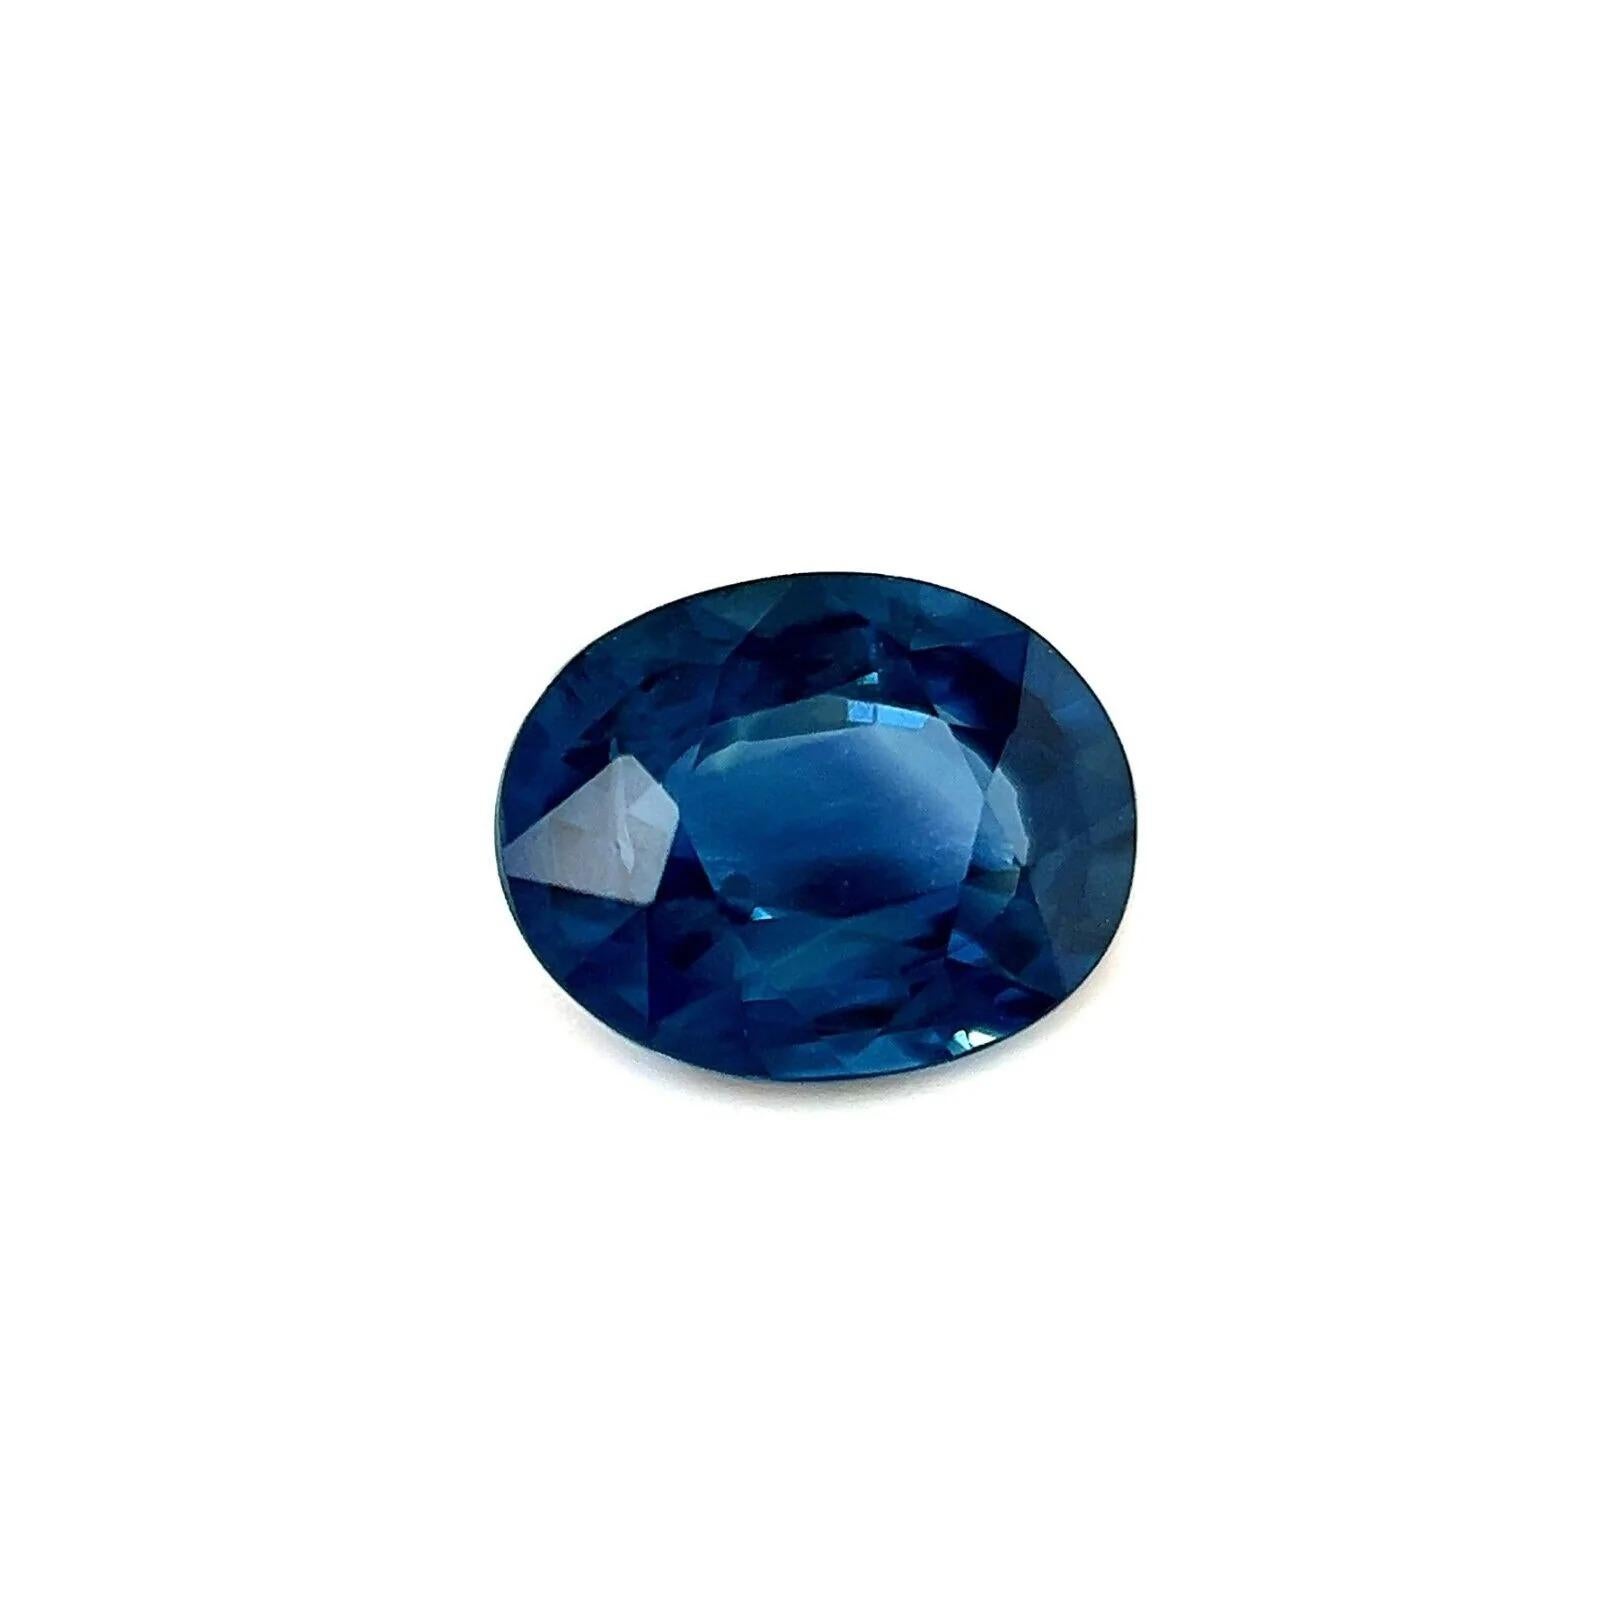 Natural Australian Deep Blue Sapphire 0.89ct Oval Cut Loose Gem 6.5x5.2mm

Natural Australian Deep Blue Sapphire Gemstone.
0.89 Carat with a deep blue colour and very good clarity. Only some small natural inclusions visible when looking closely.